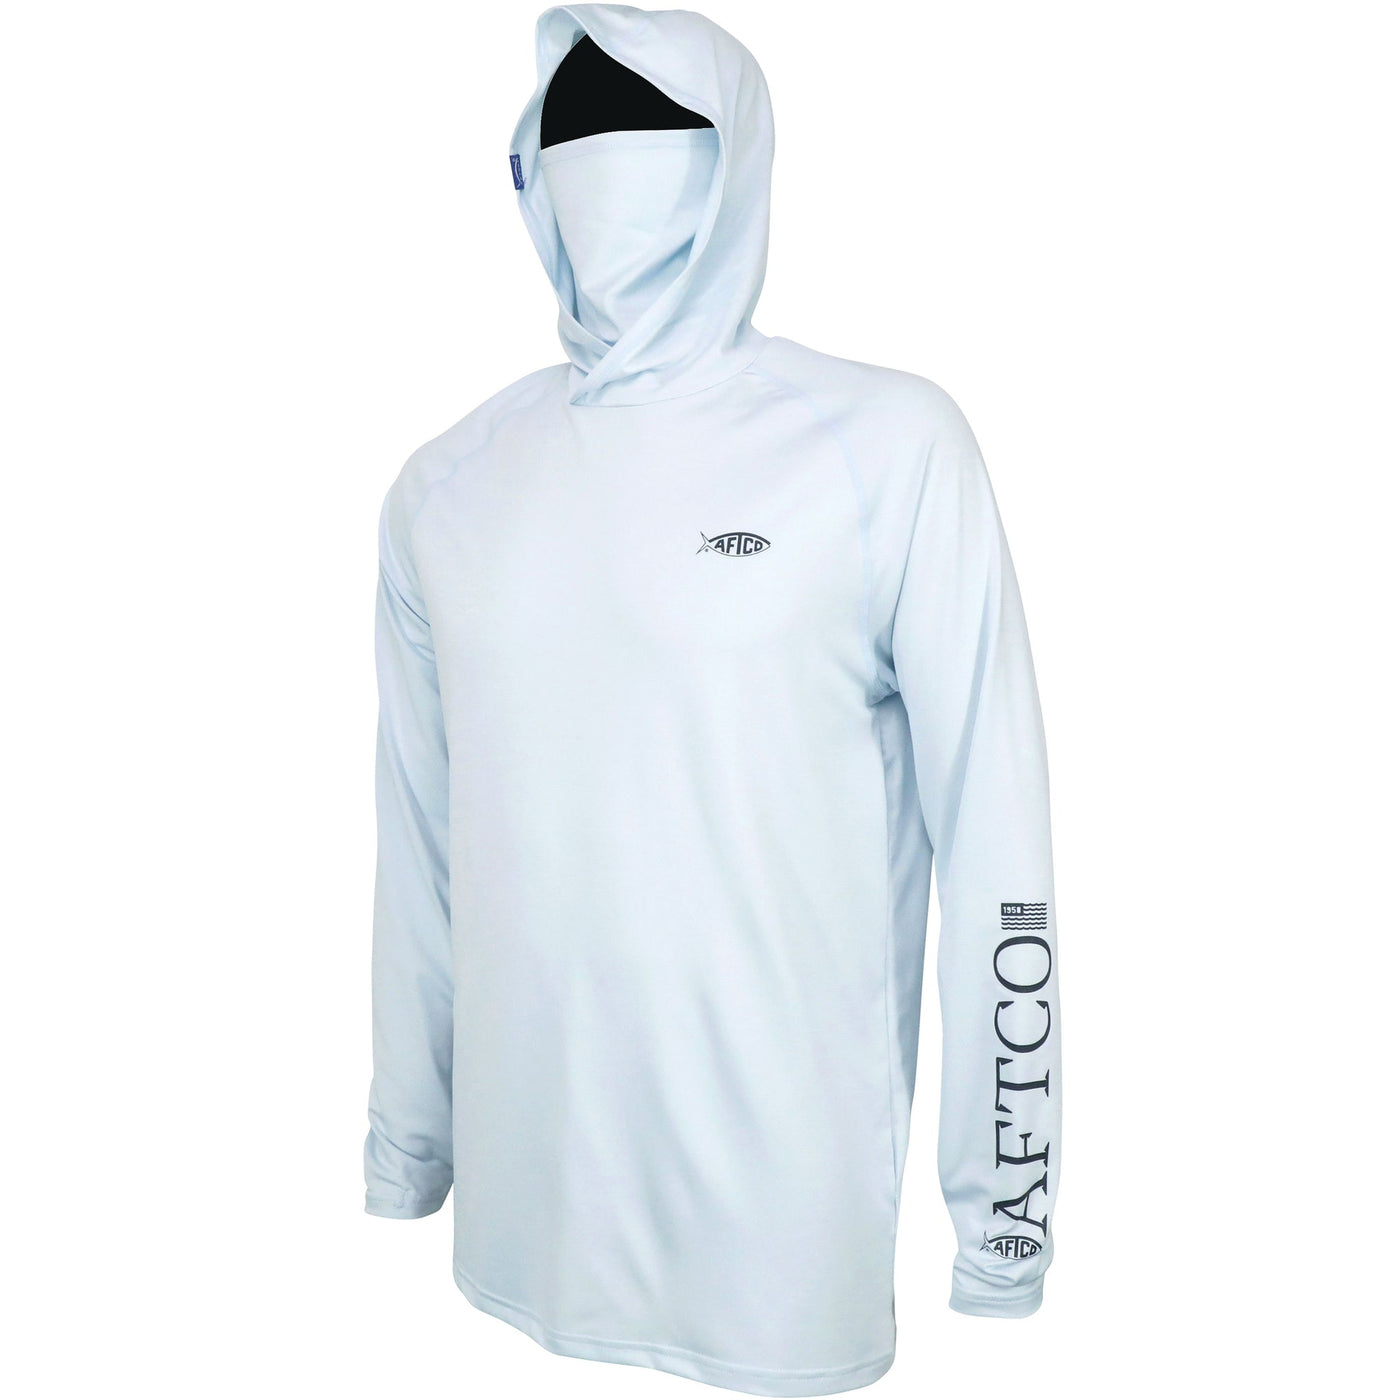 Aftco Yurei Hooded Performance Shirt-MENS CLOTHING-Light Blue Heather-S-Kevin's Fine Outdoor Gear & Apparel